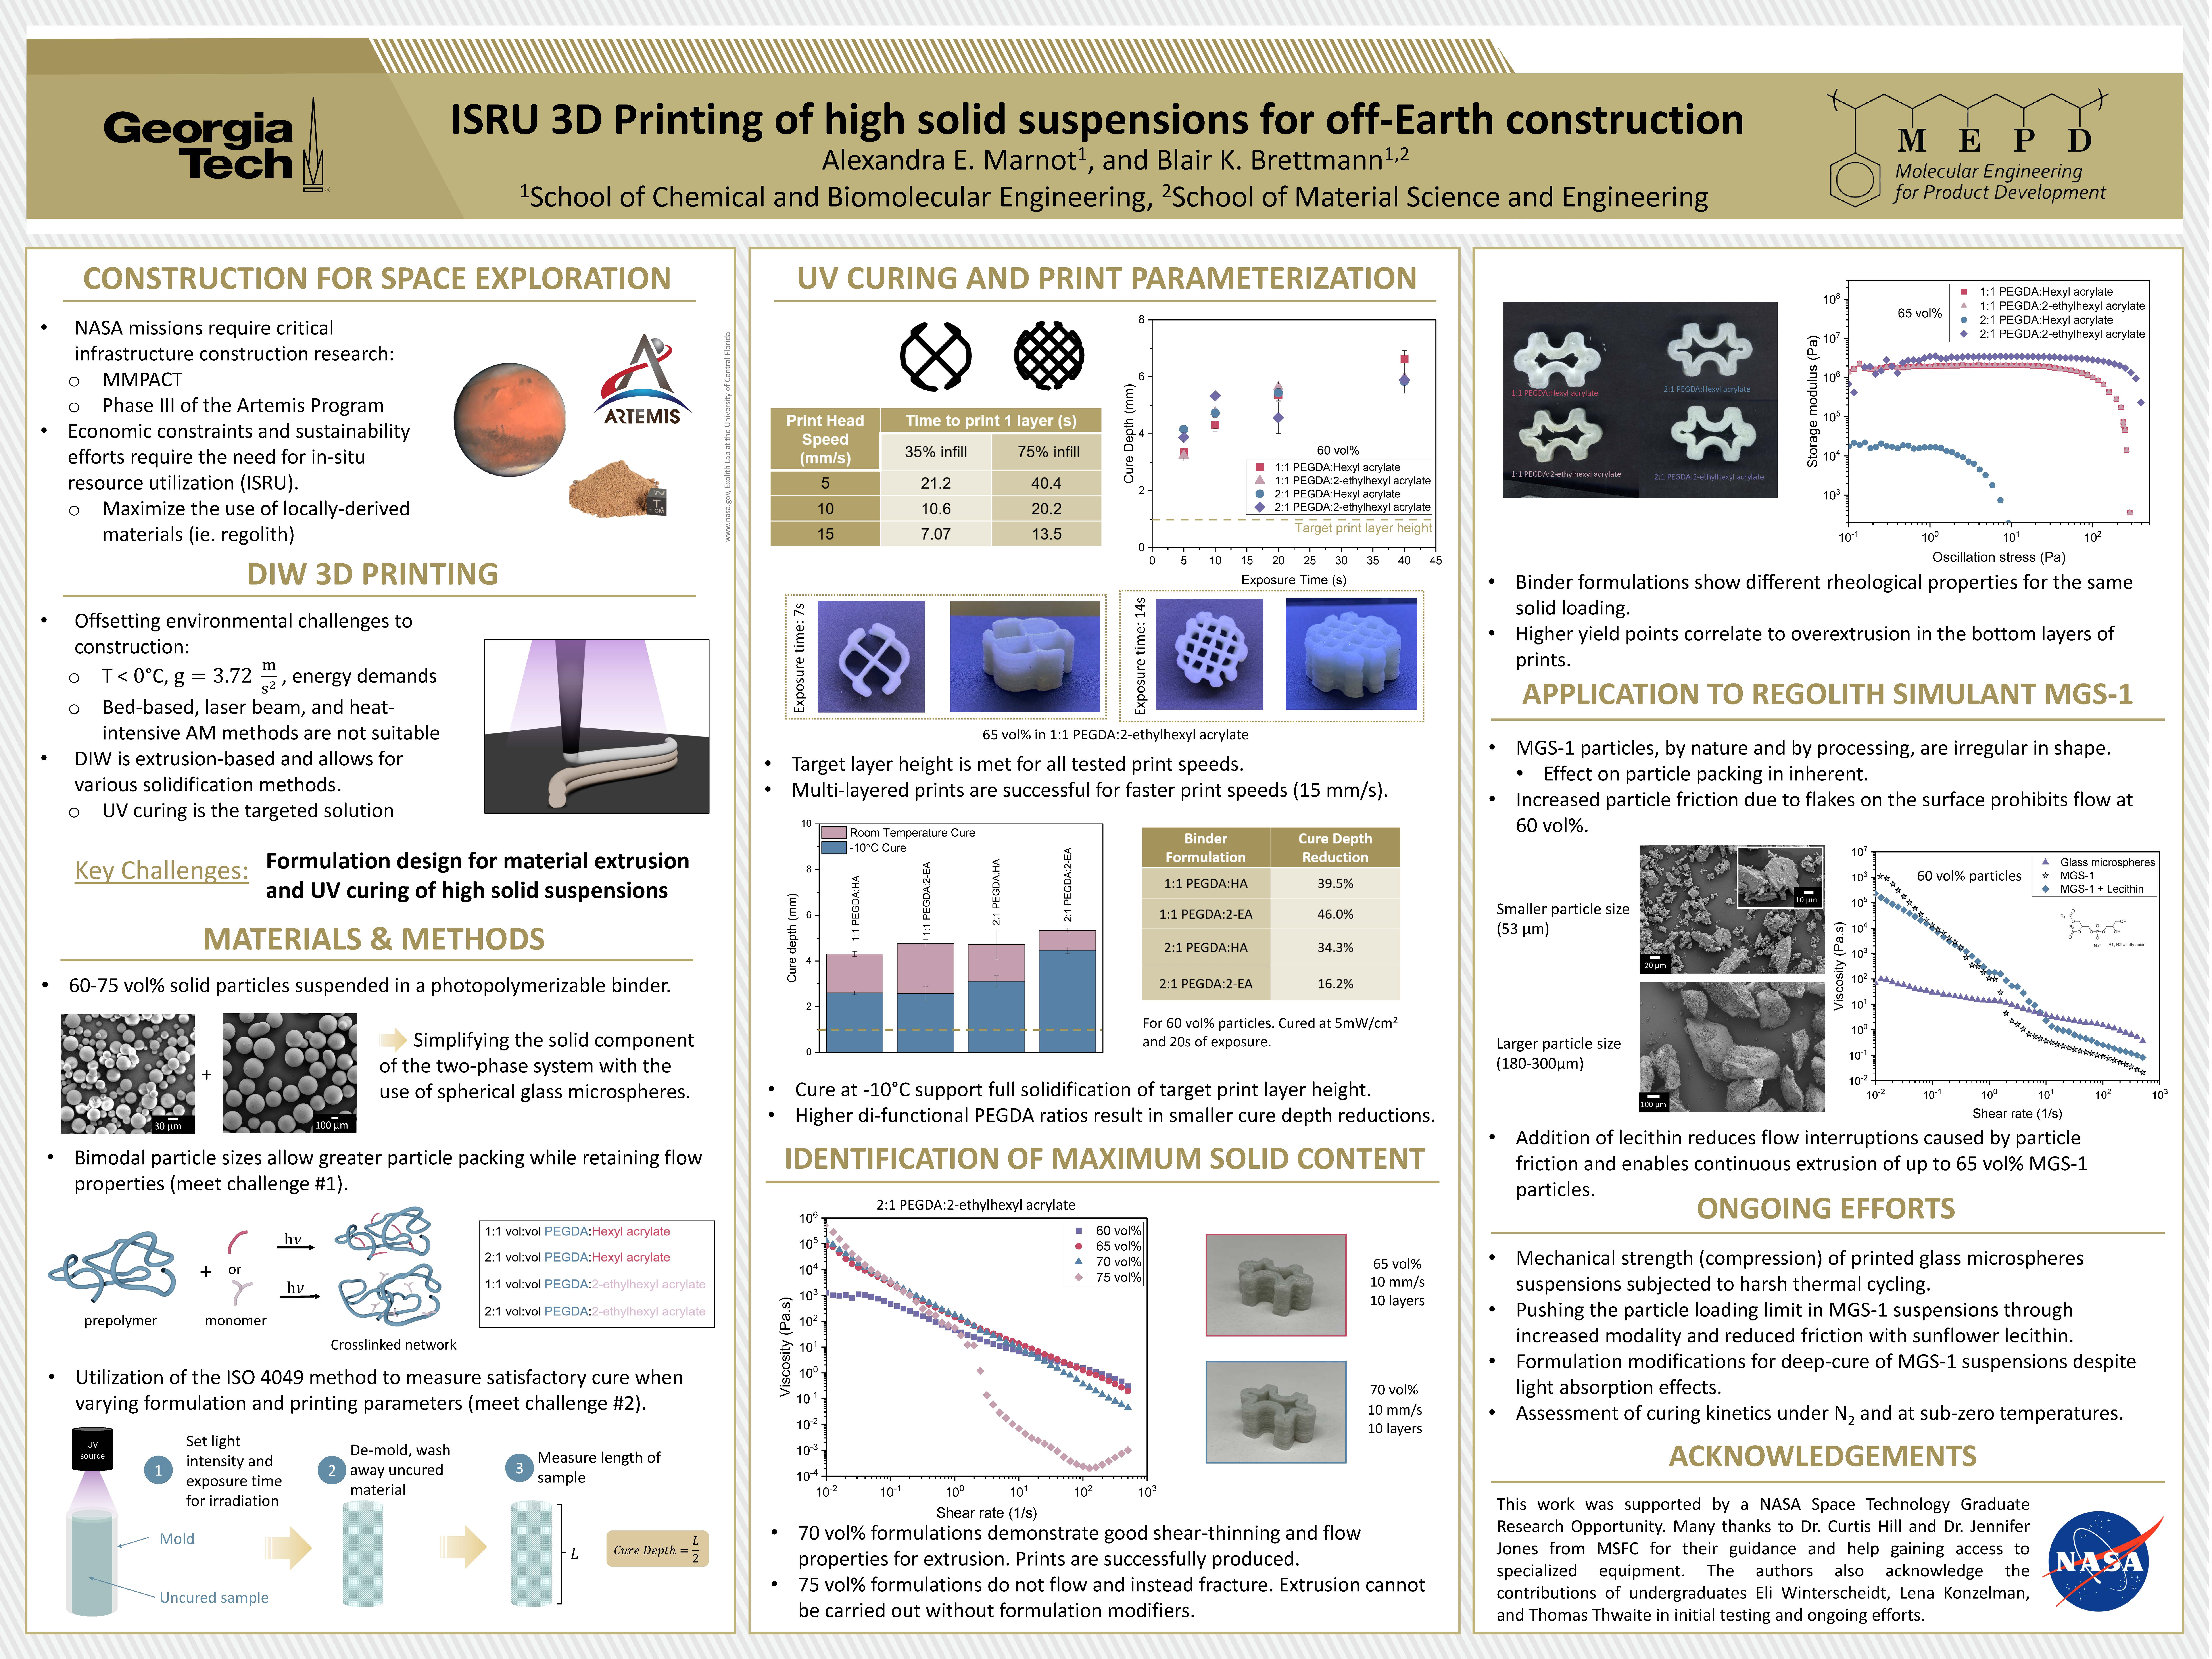 ISRU 3D Printing of High Solid Suspensions for Off-Earth Construction